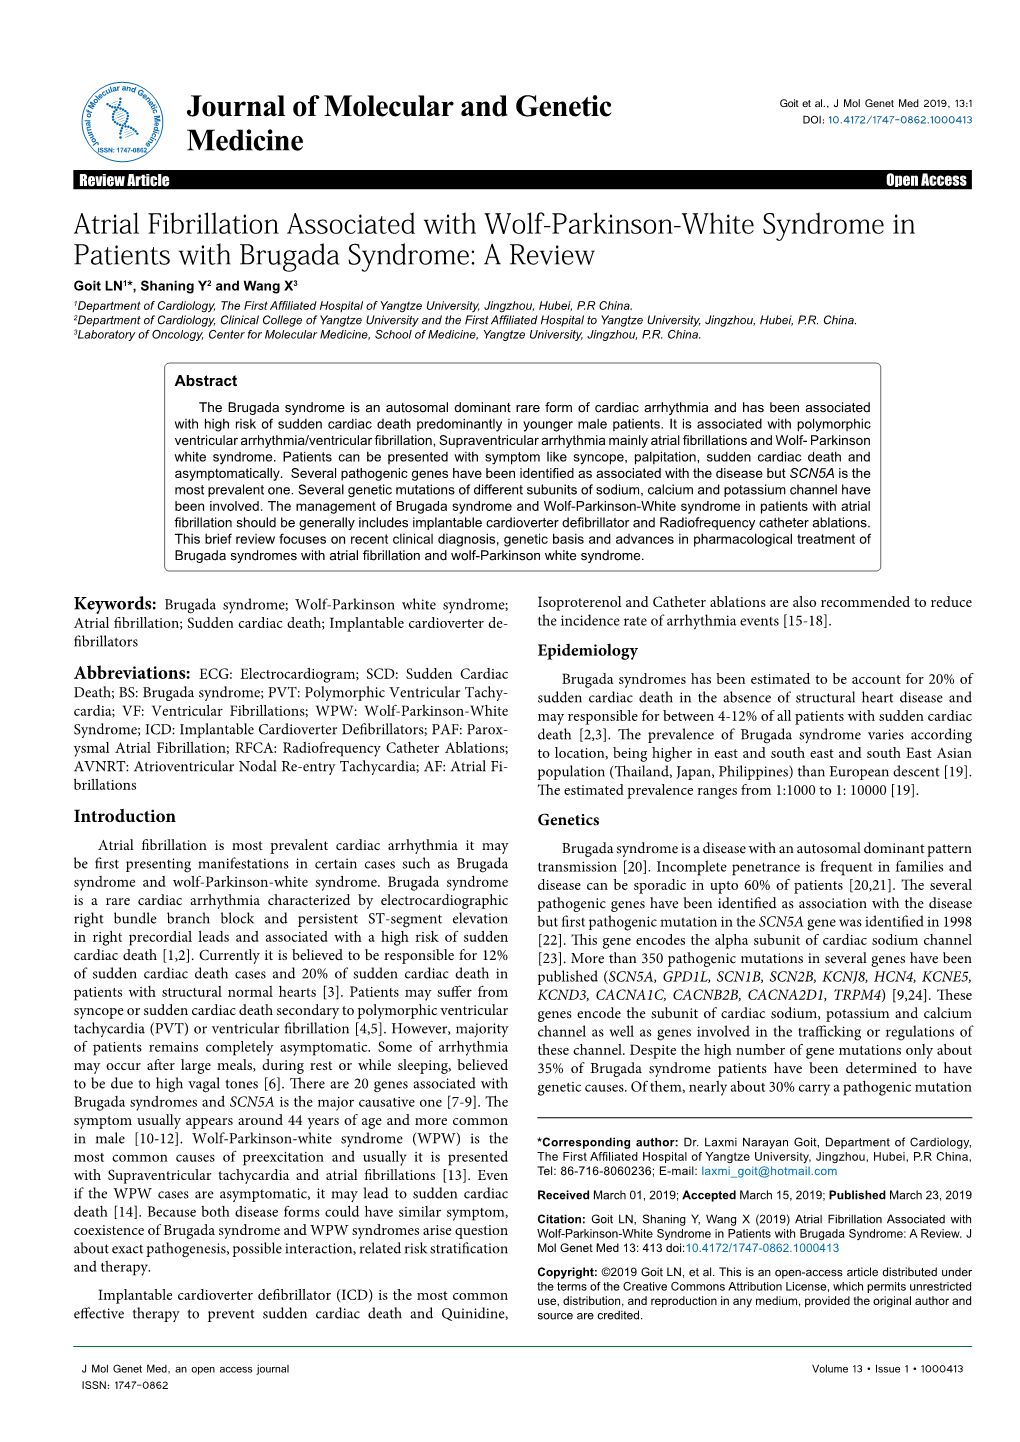 Atrial Fibrillation Associated with Wolf-Parkinson-White Syndrome in Patients with Brugada Syndrome: a Review